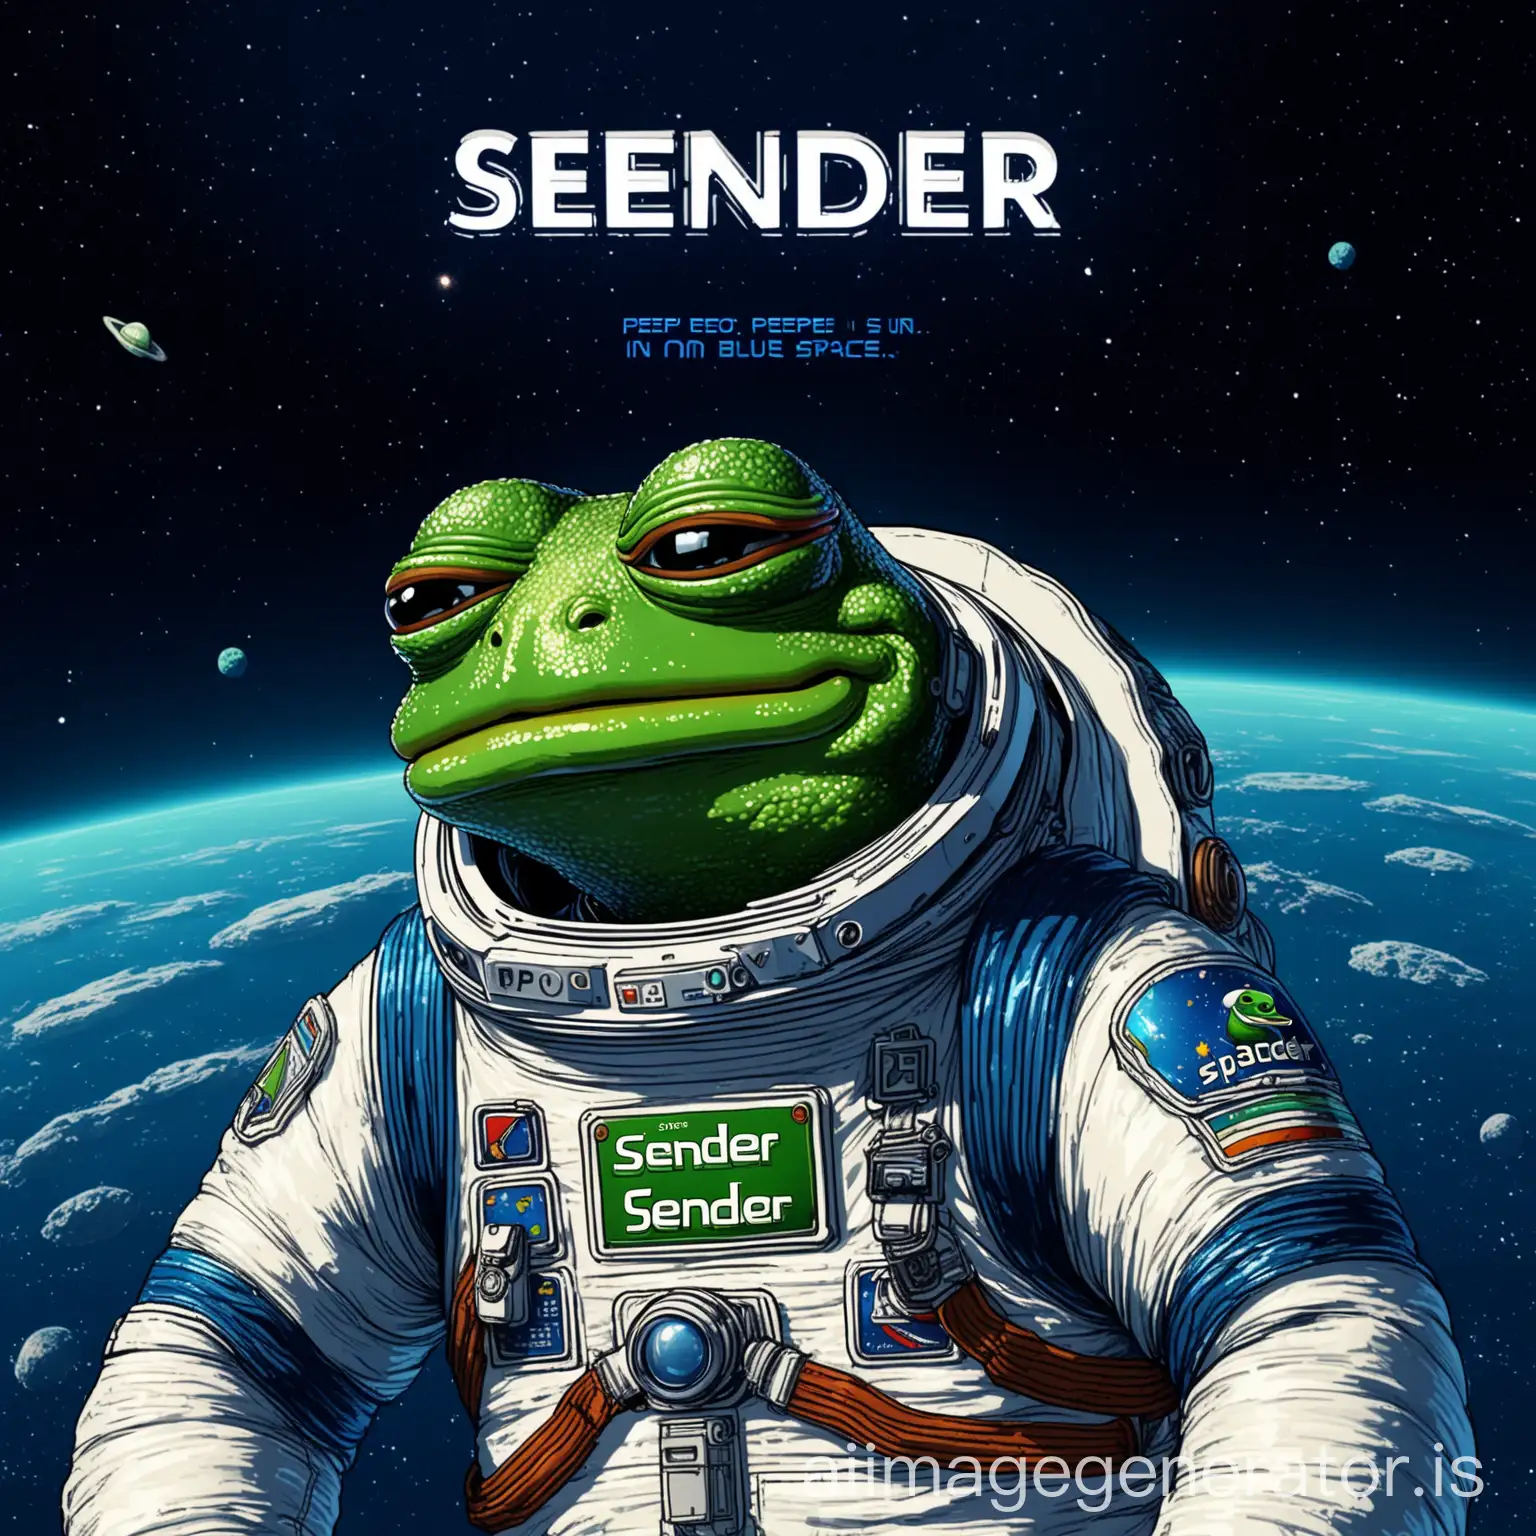 a pepe in blue space with spacesuit
"sender " Text in background
details are so high quality and lighting with detailed details